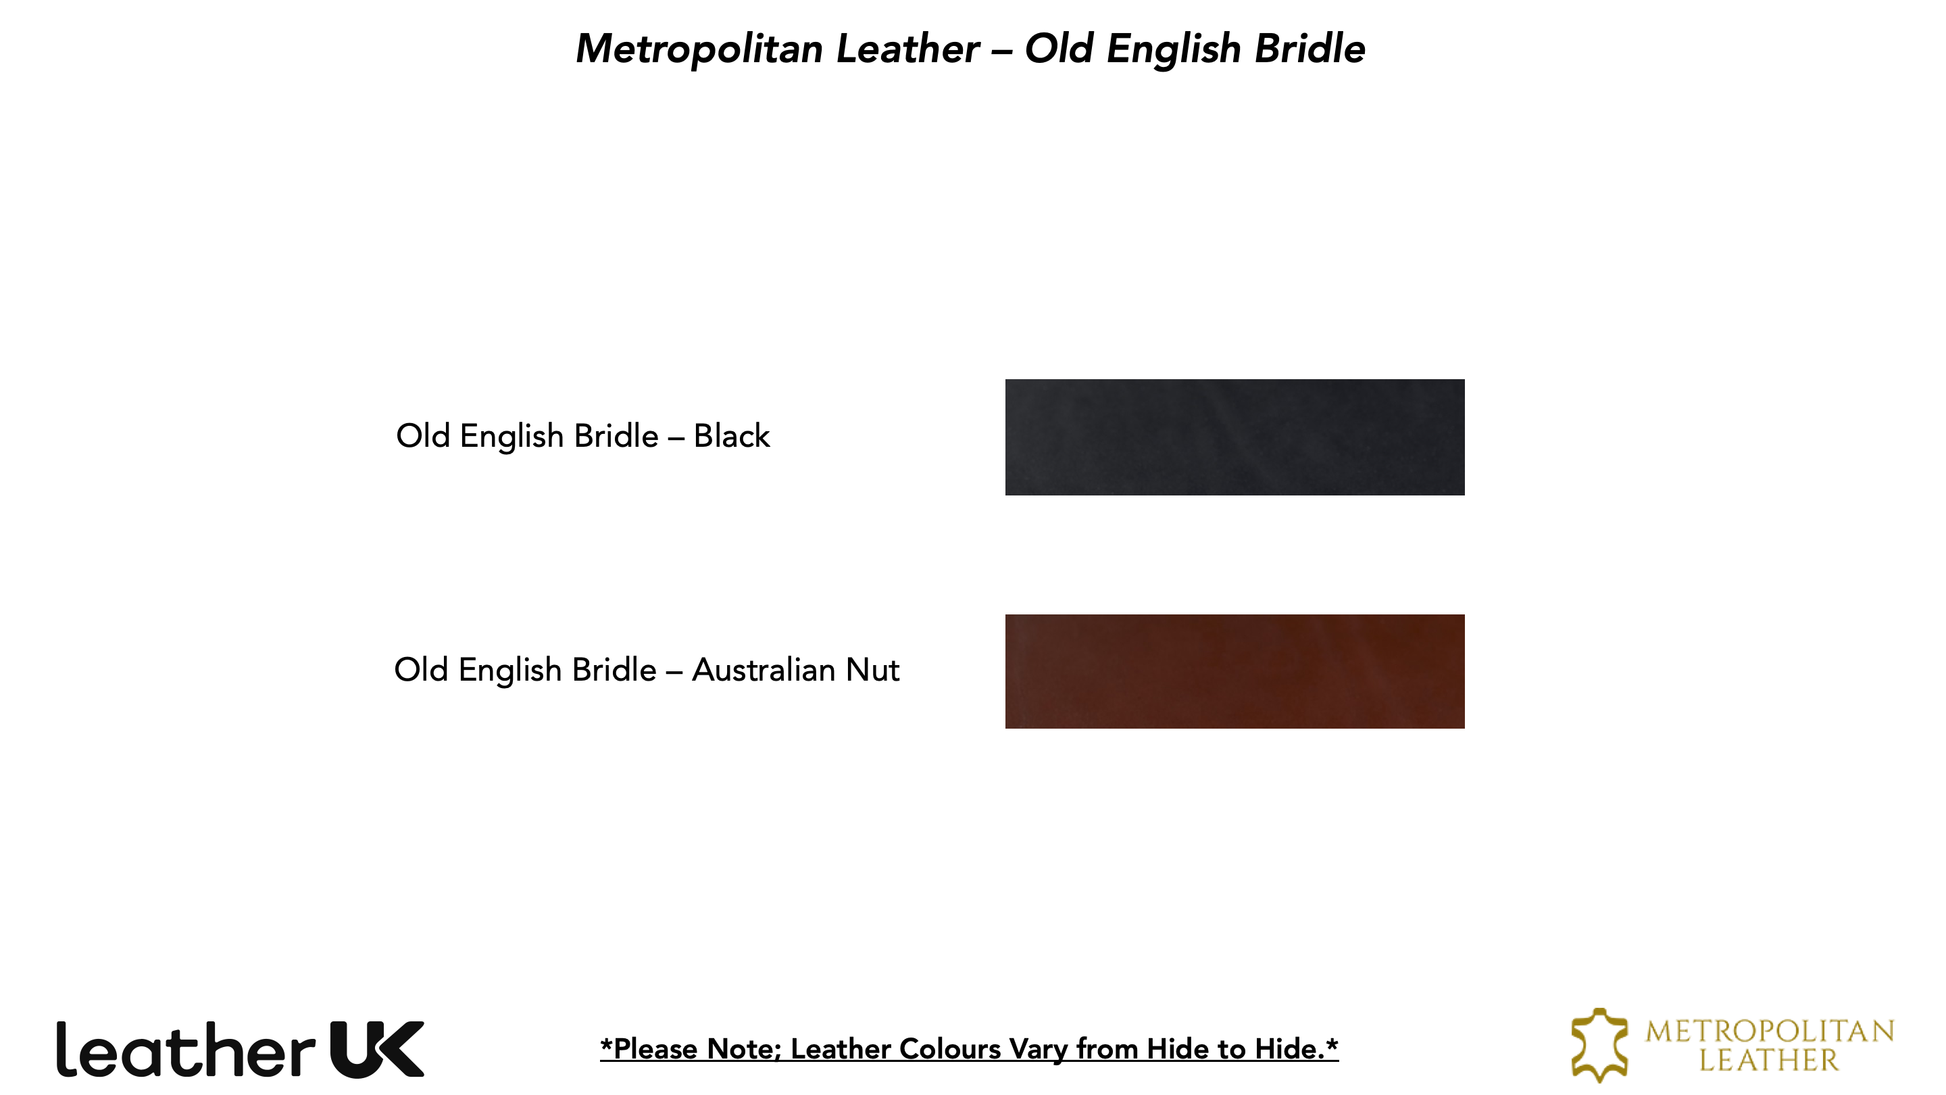 Vegetable Tanned Full Grain English Bridle Metropolitan Leather Swatch